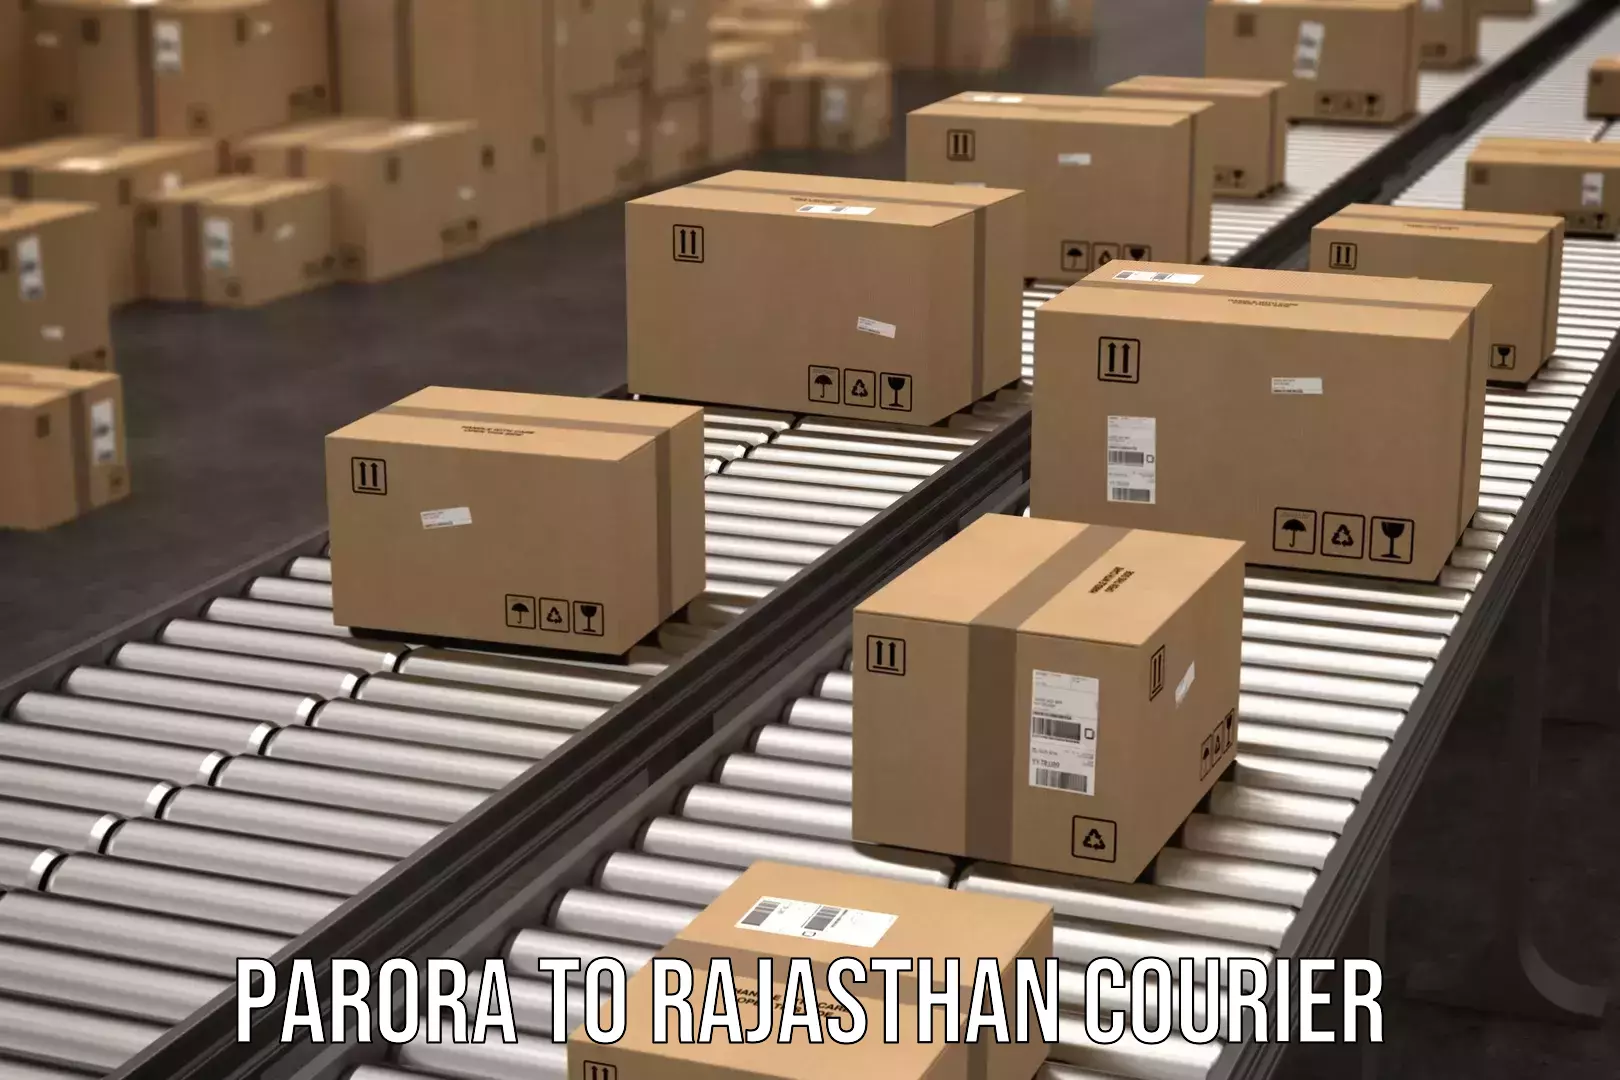 Nationwide parcel services Parora to Piparcity